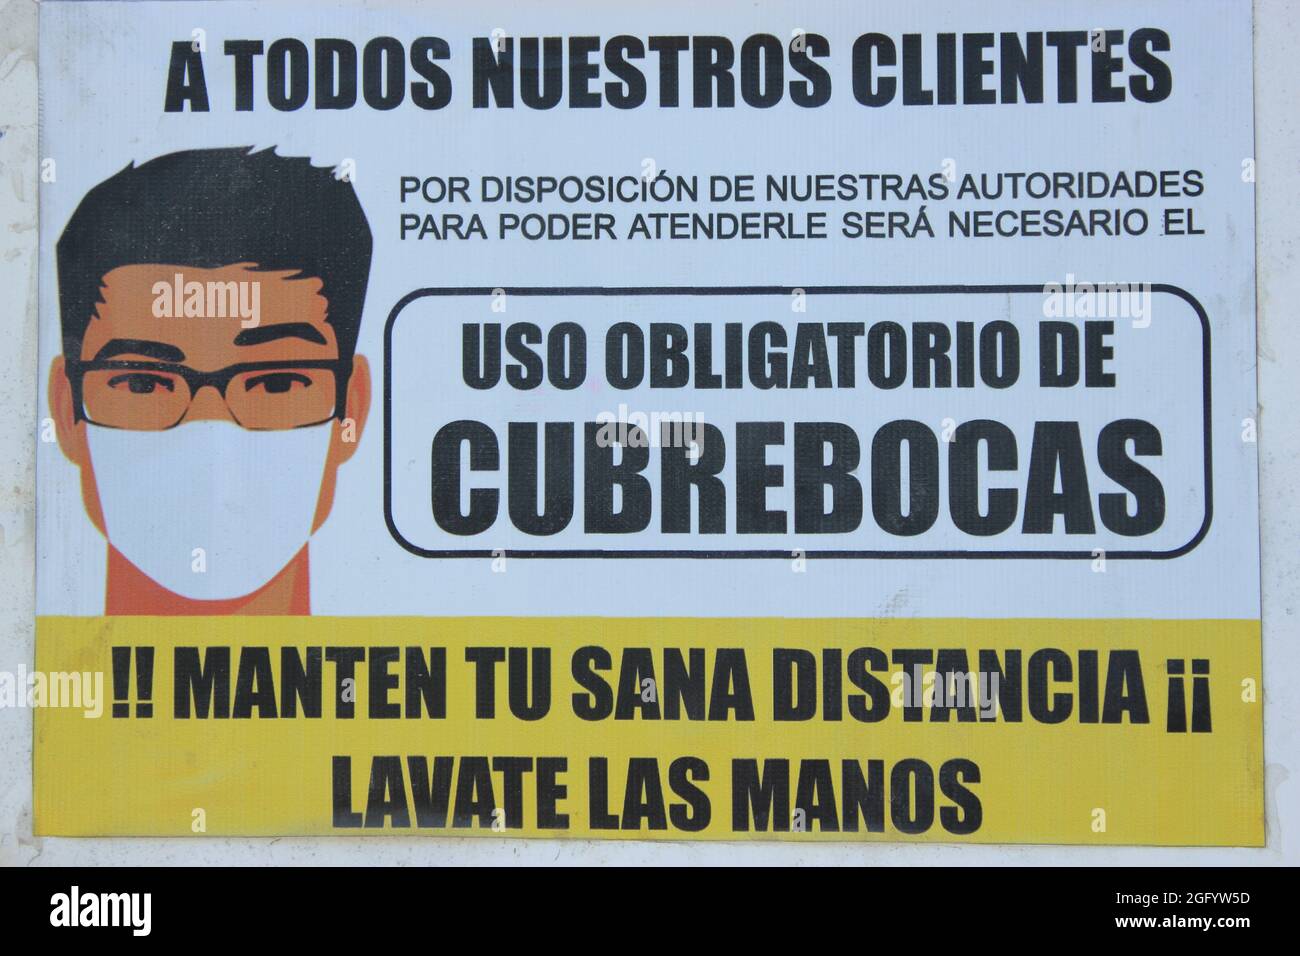 Covid-19 Public Health warning to wear a mask and wash hands, Yucatan, Mexico Stock Photo